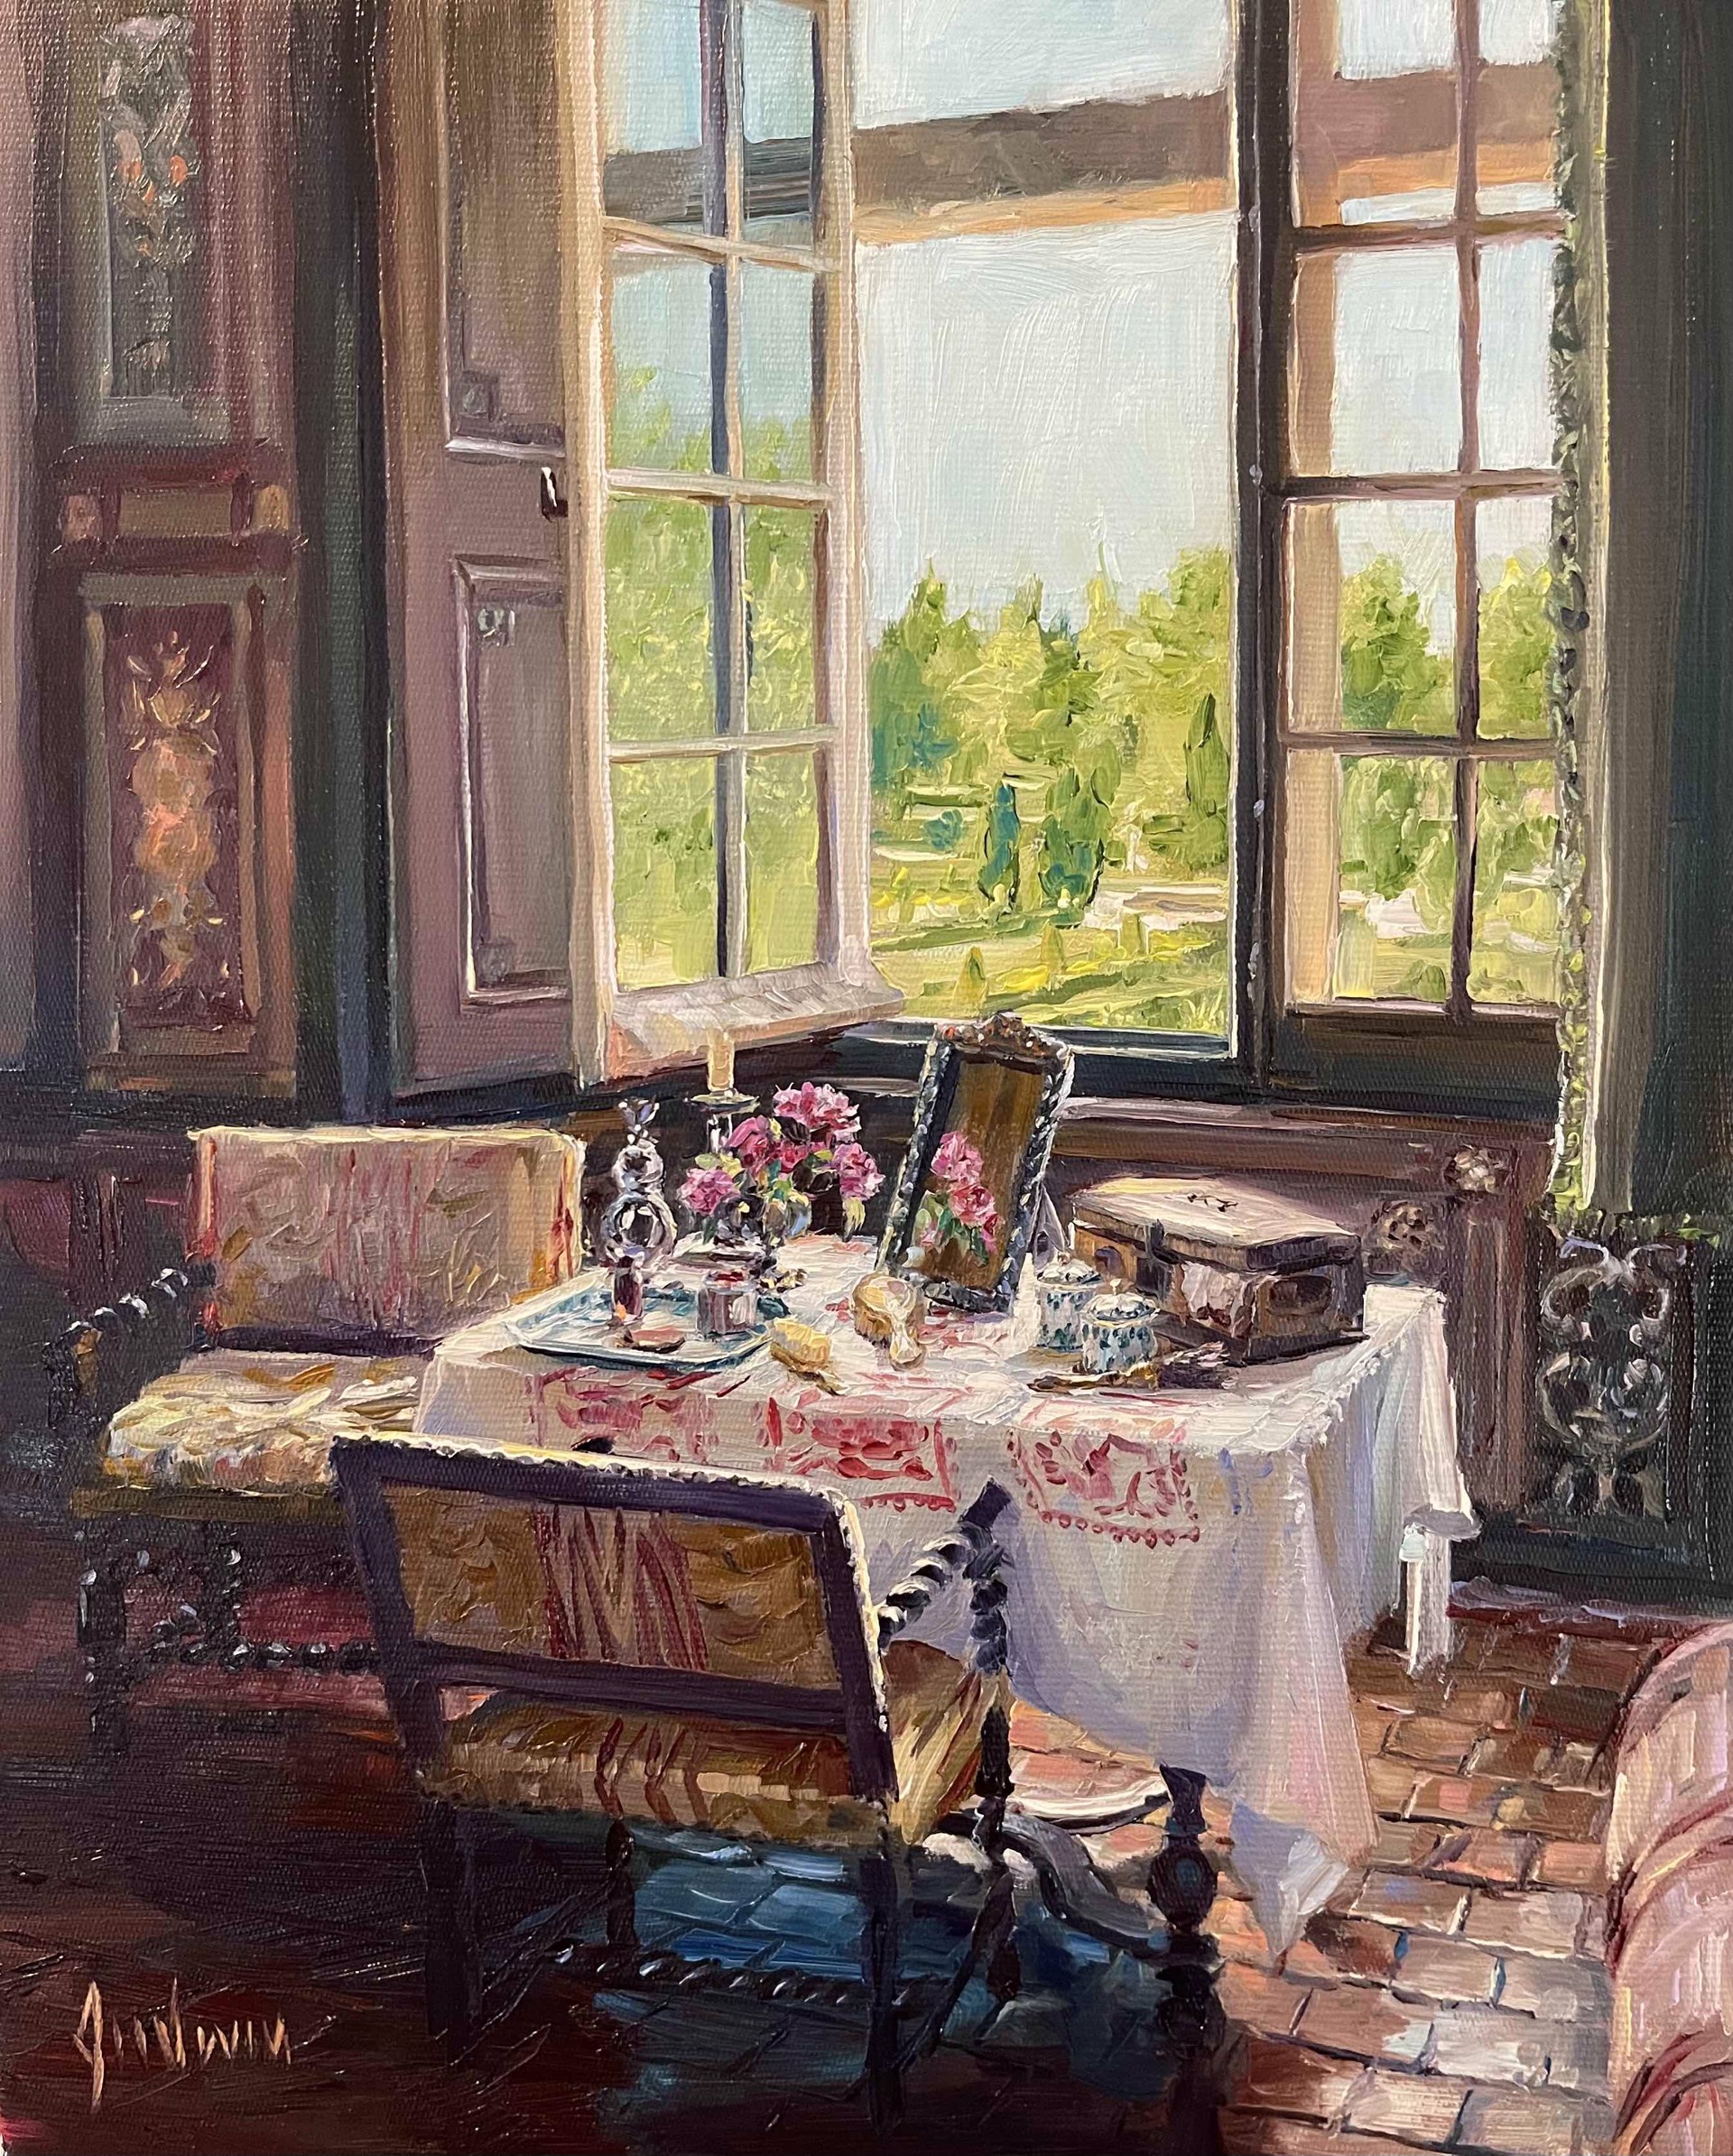 The Bedroom Window, Chateau de Cormatin by Lindsay Goodwin